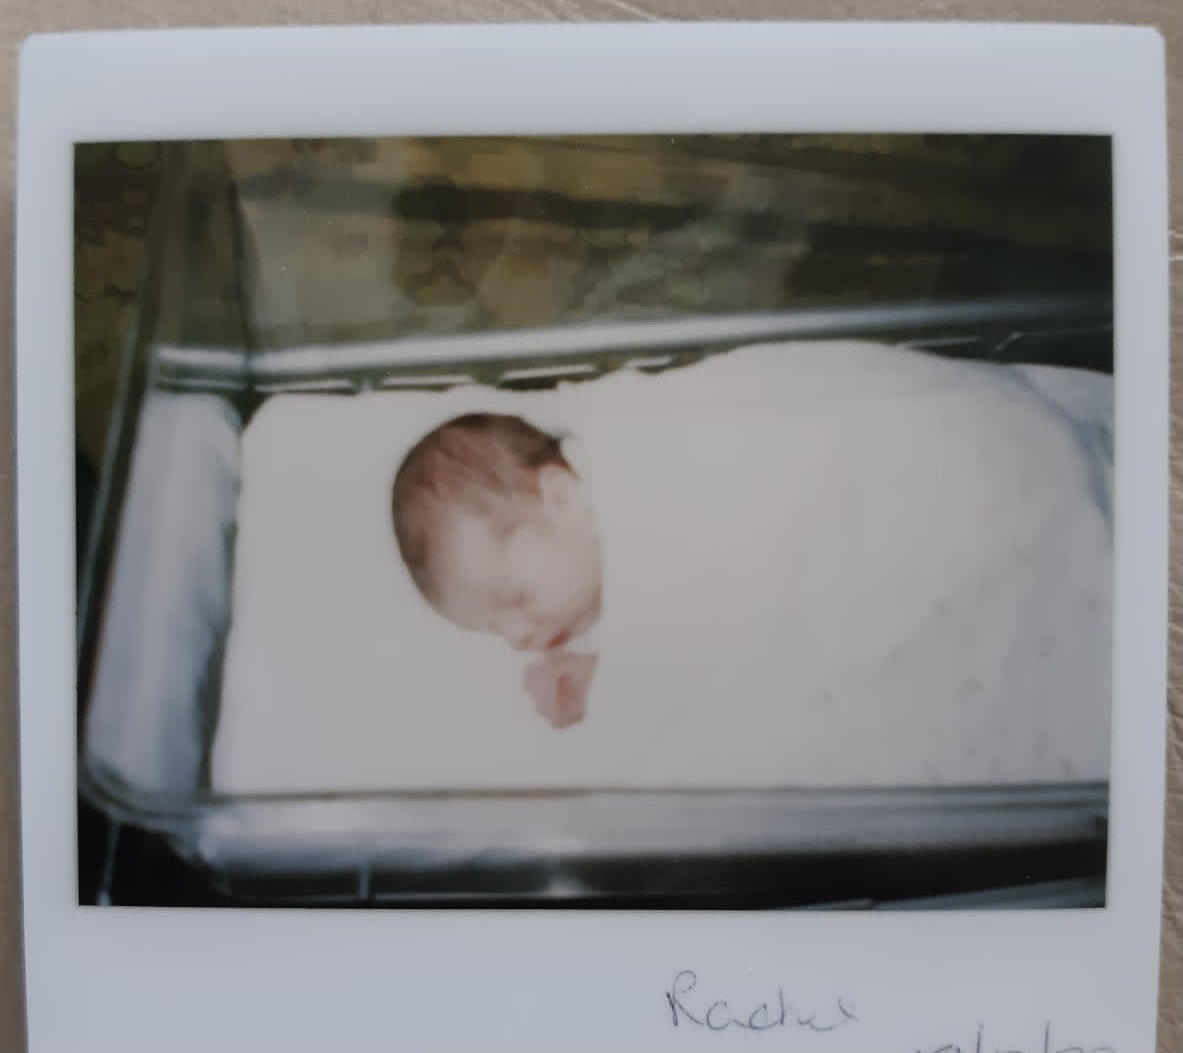 QT Oldest photo of me on my phone some are asking …. 🤣 not even a day old! 🤣 #BabyPhoto